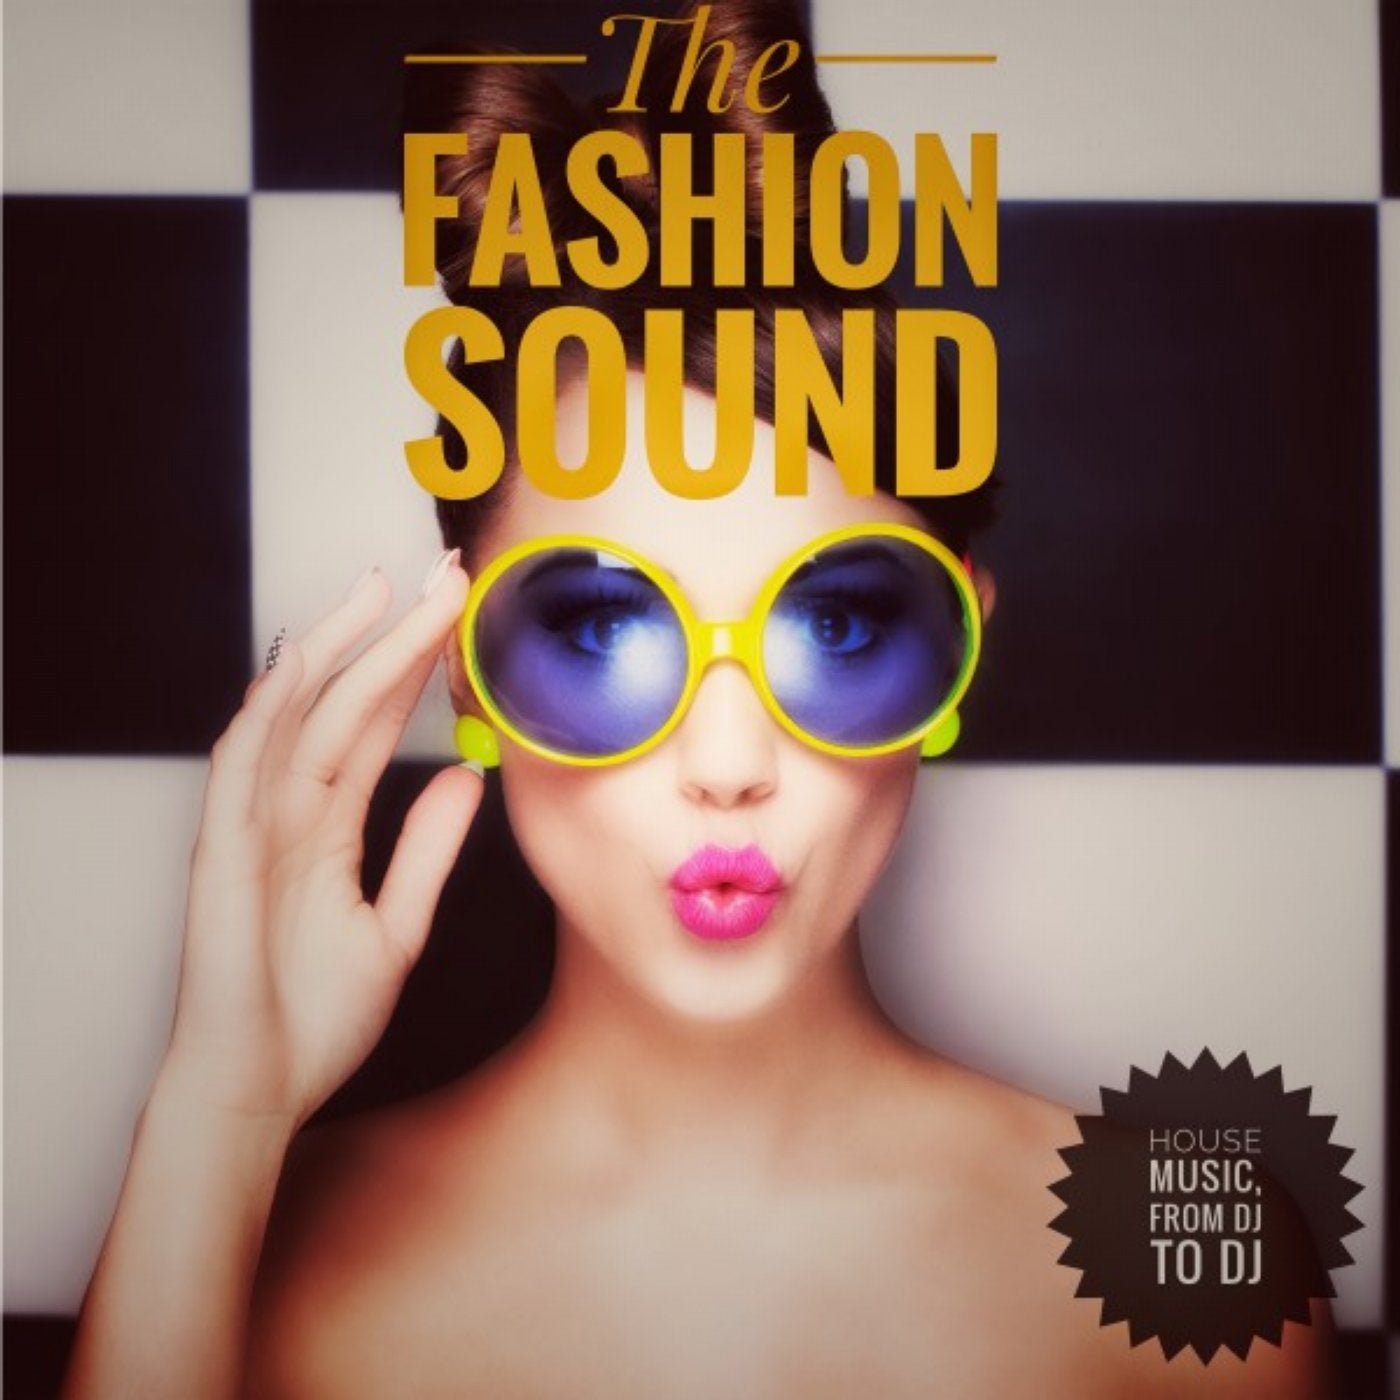 The Fashion Sound (House Music, from DJ to DJ)